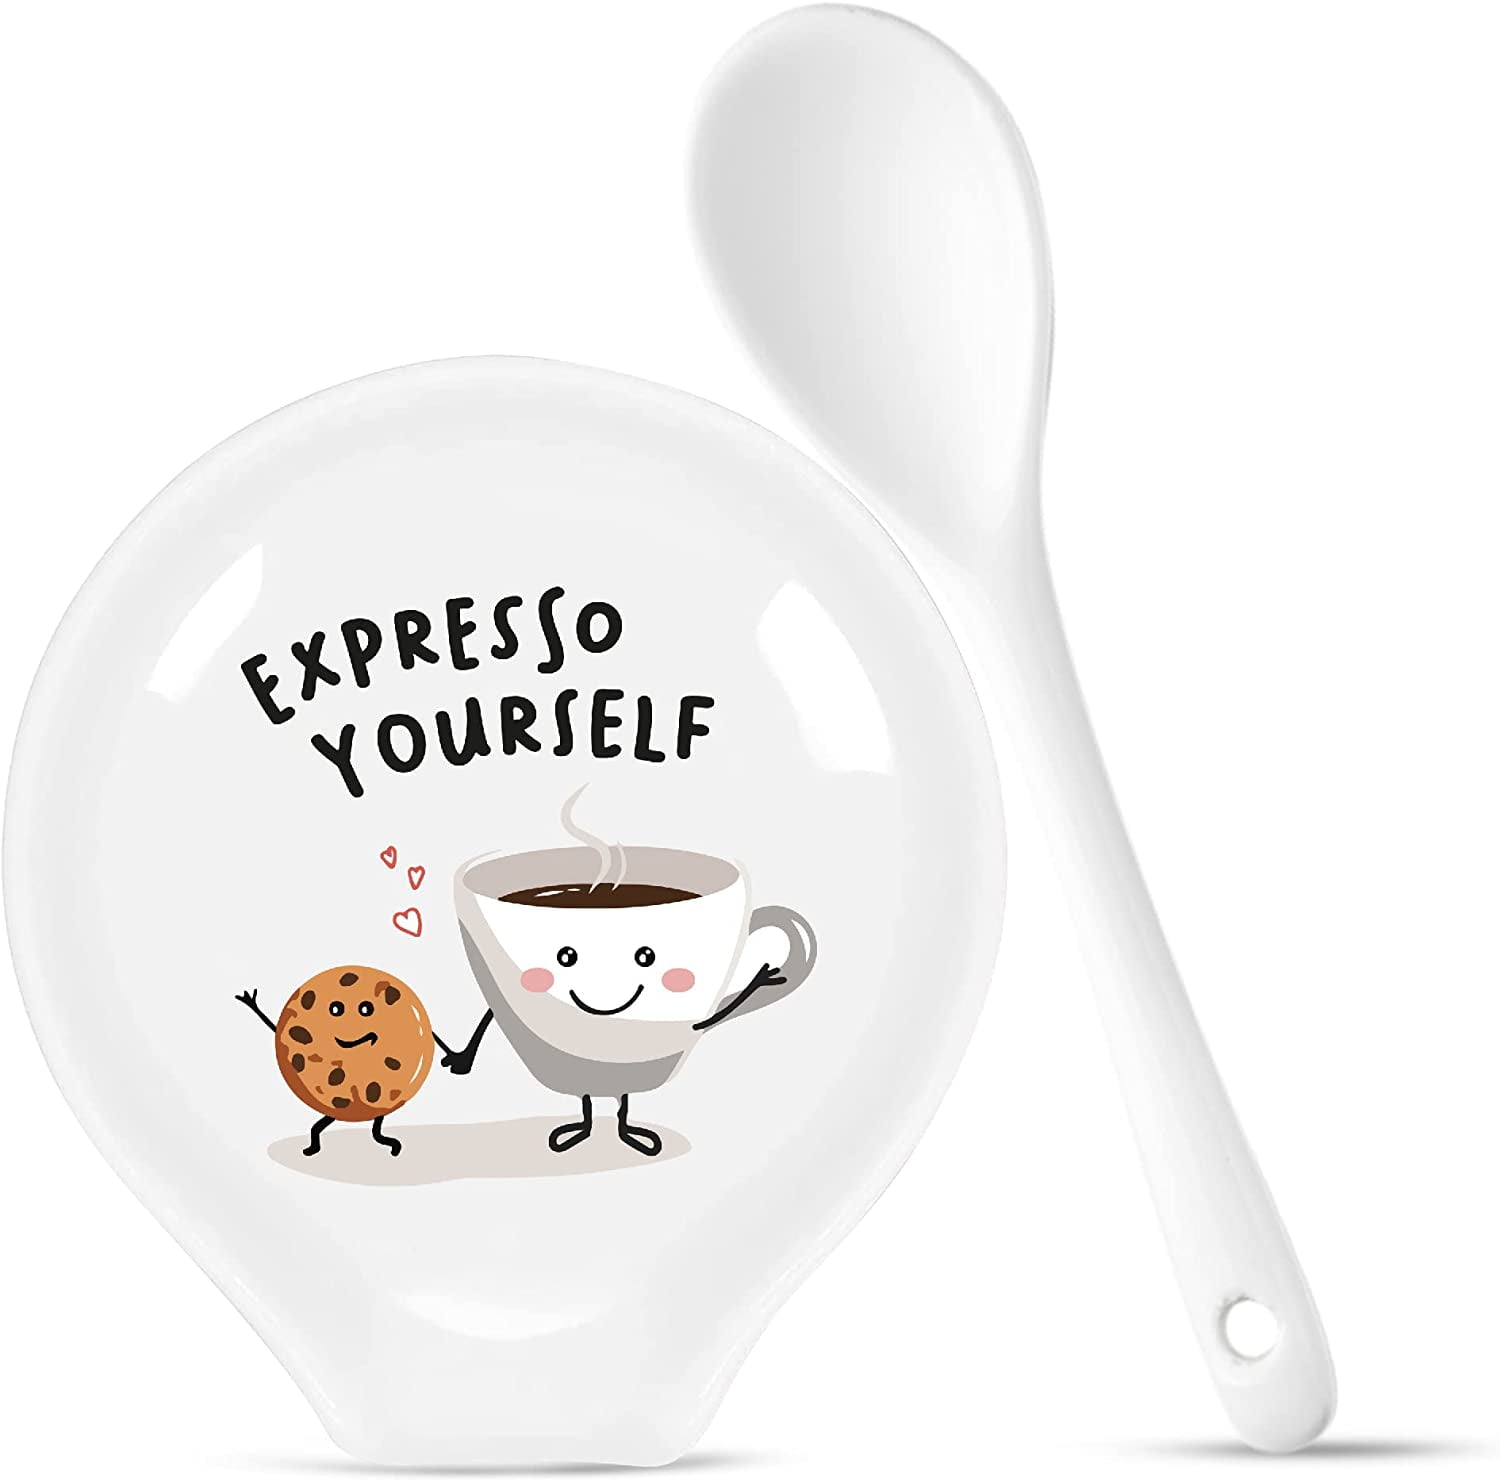 4 Pieces Coffee Spoon Rest And Spoon Funny and 50 similar items